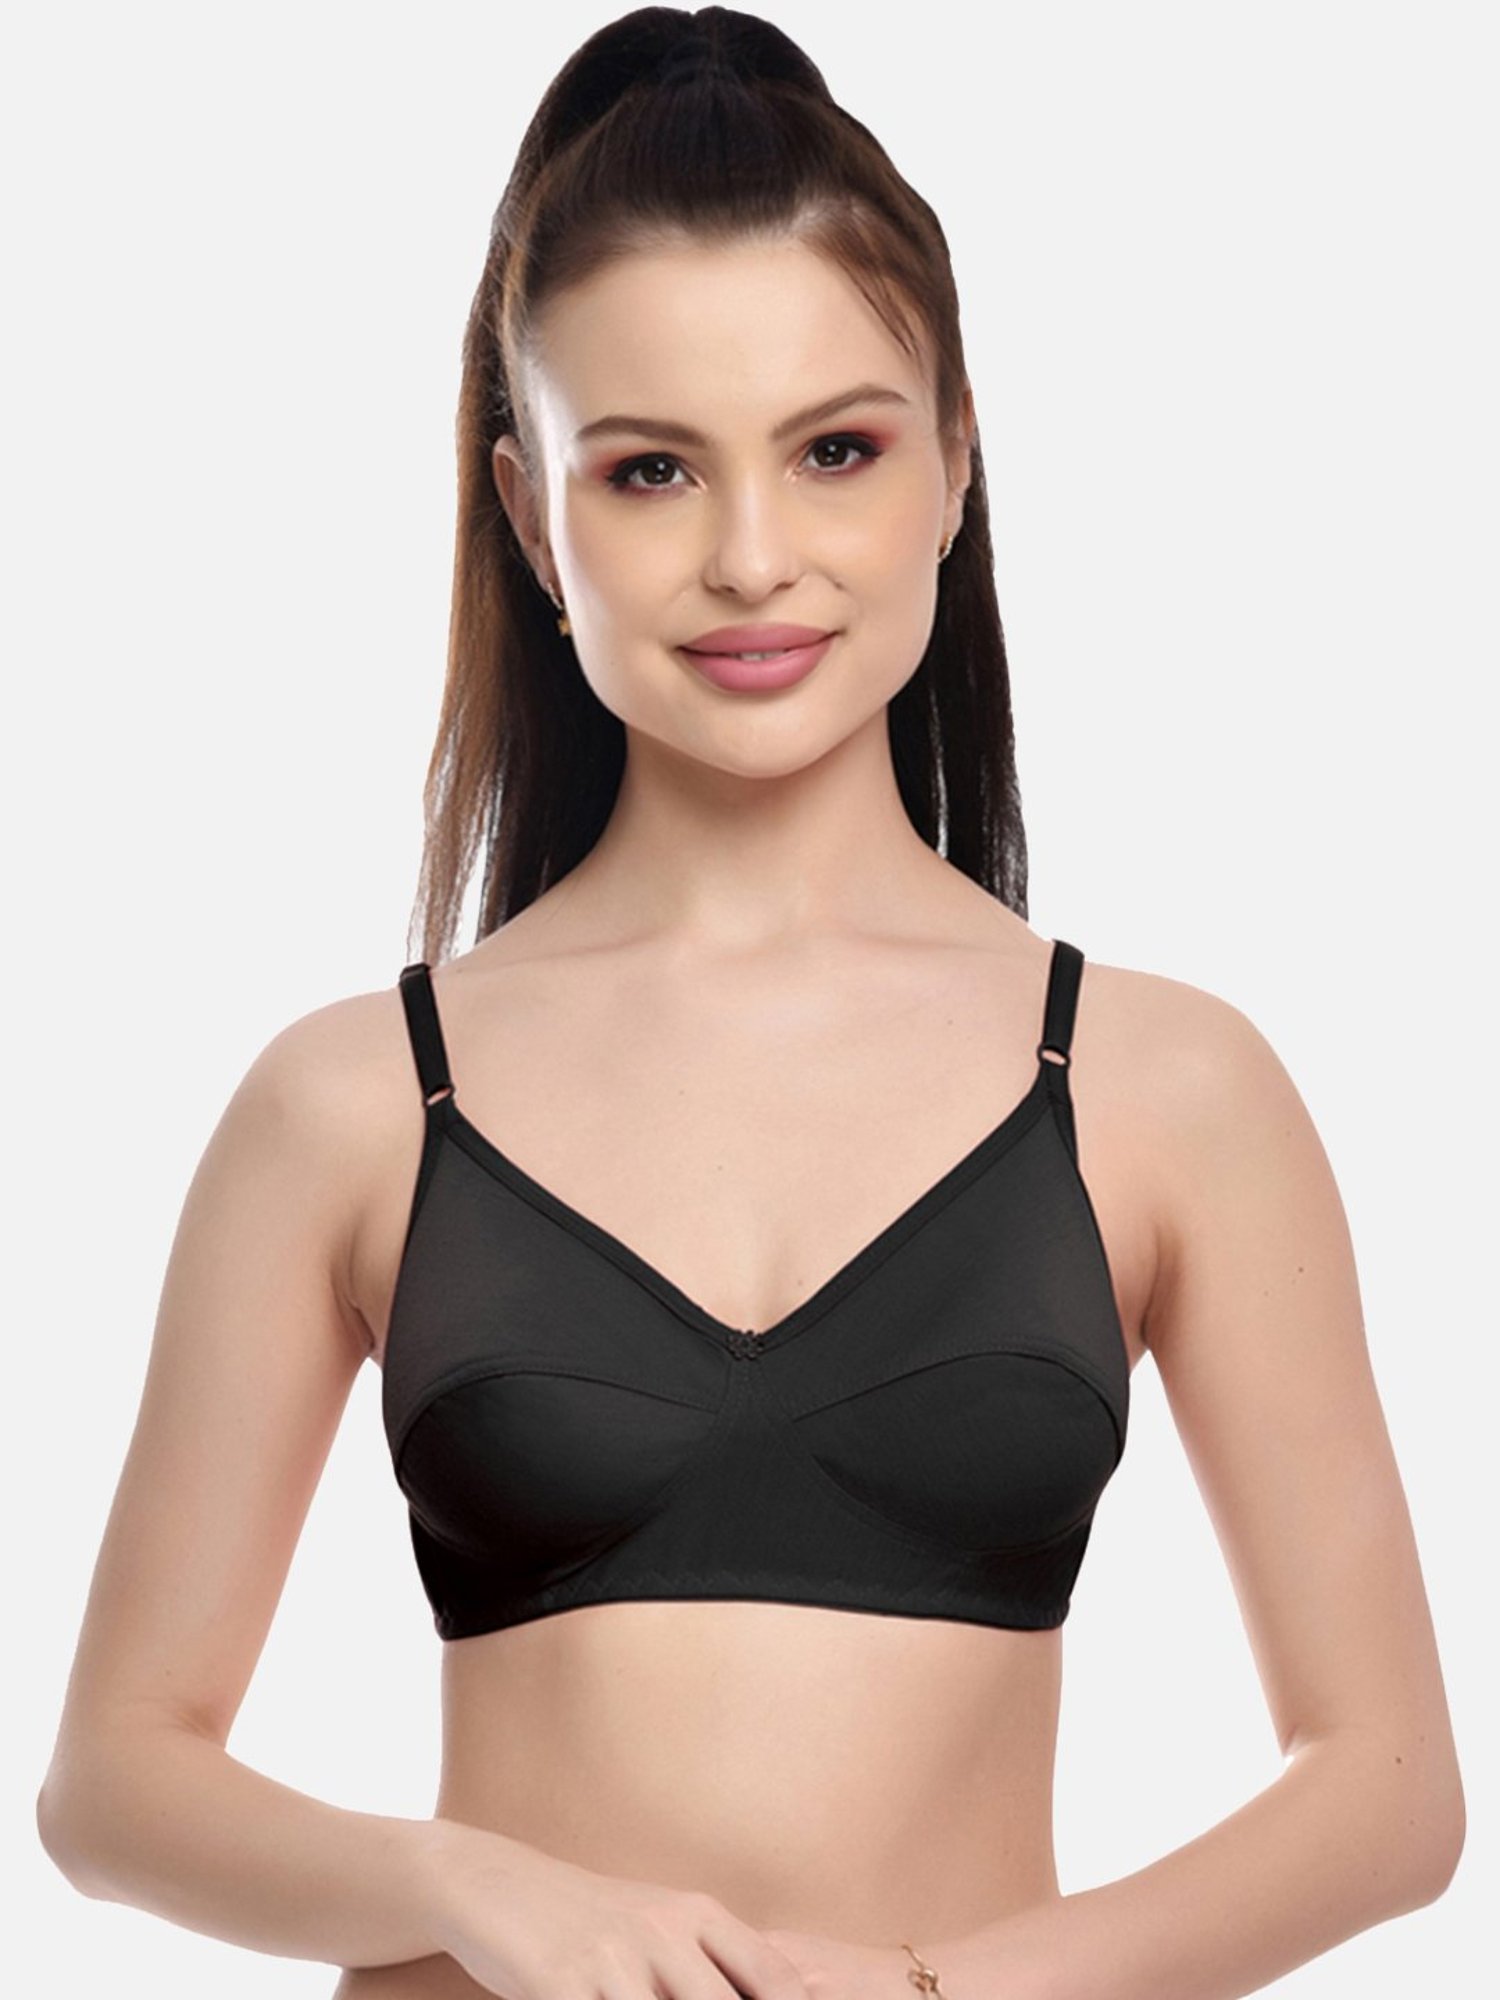 Buy FIMS - Fashion is my style Women's Full Coverage Cotton Bra